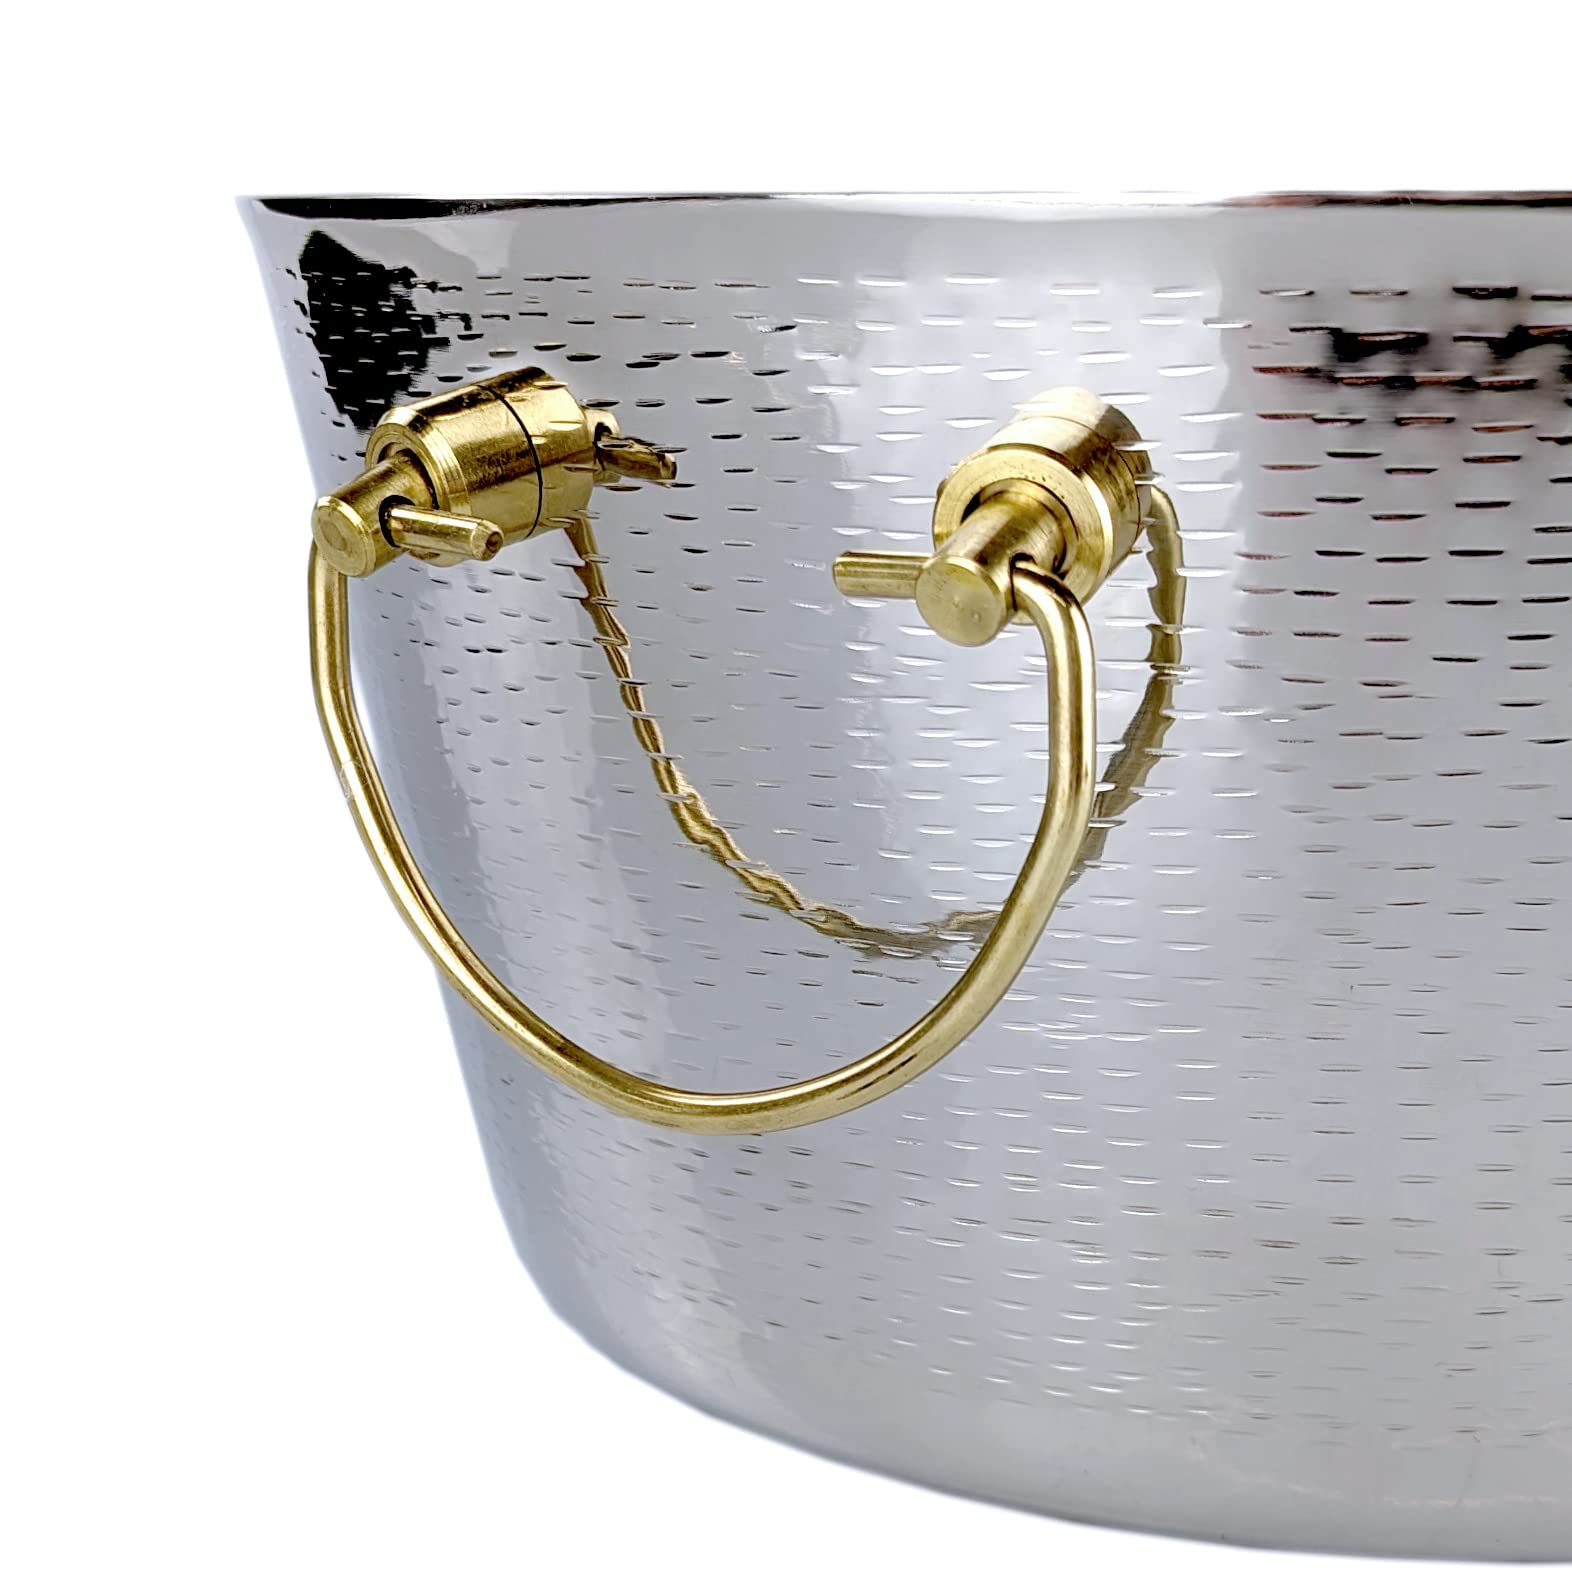 Insulated Metal Ice Bucket for Parties & Gifts- Double-Walled Hammered Stainless Steel Anchored Beverage Tub/Ice Bucket for Parties, Weddings, with Double-Hinged Gold Handles